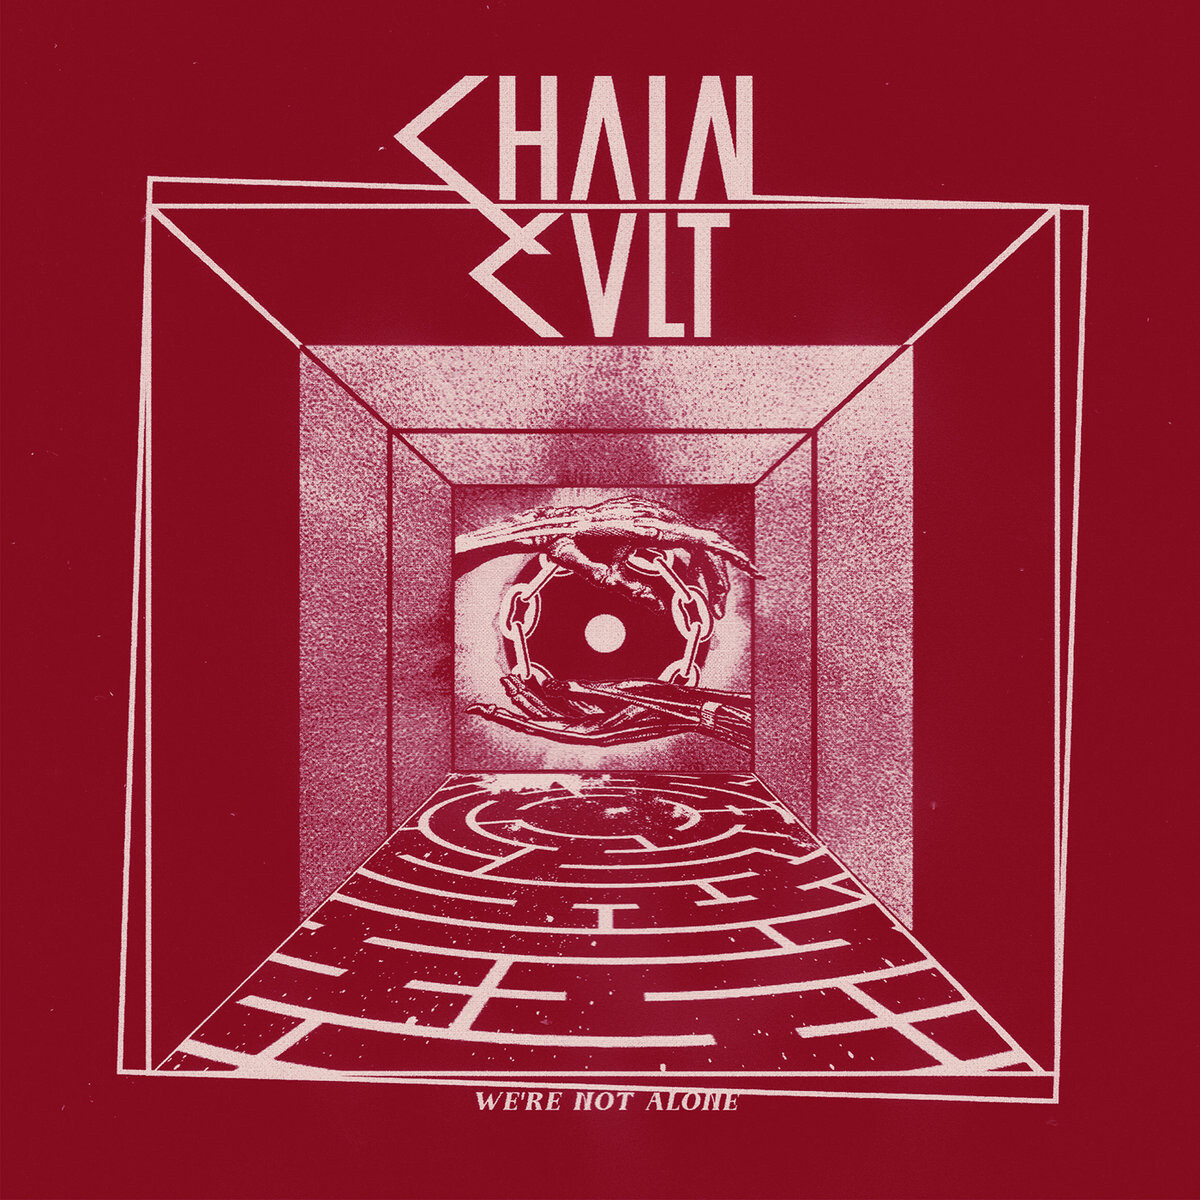 chain-cult-were-not-alone